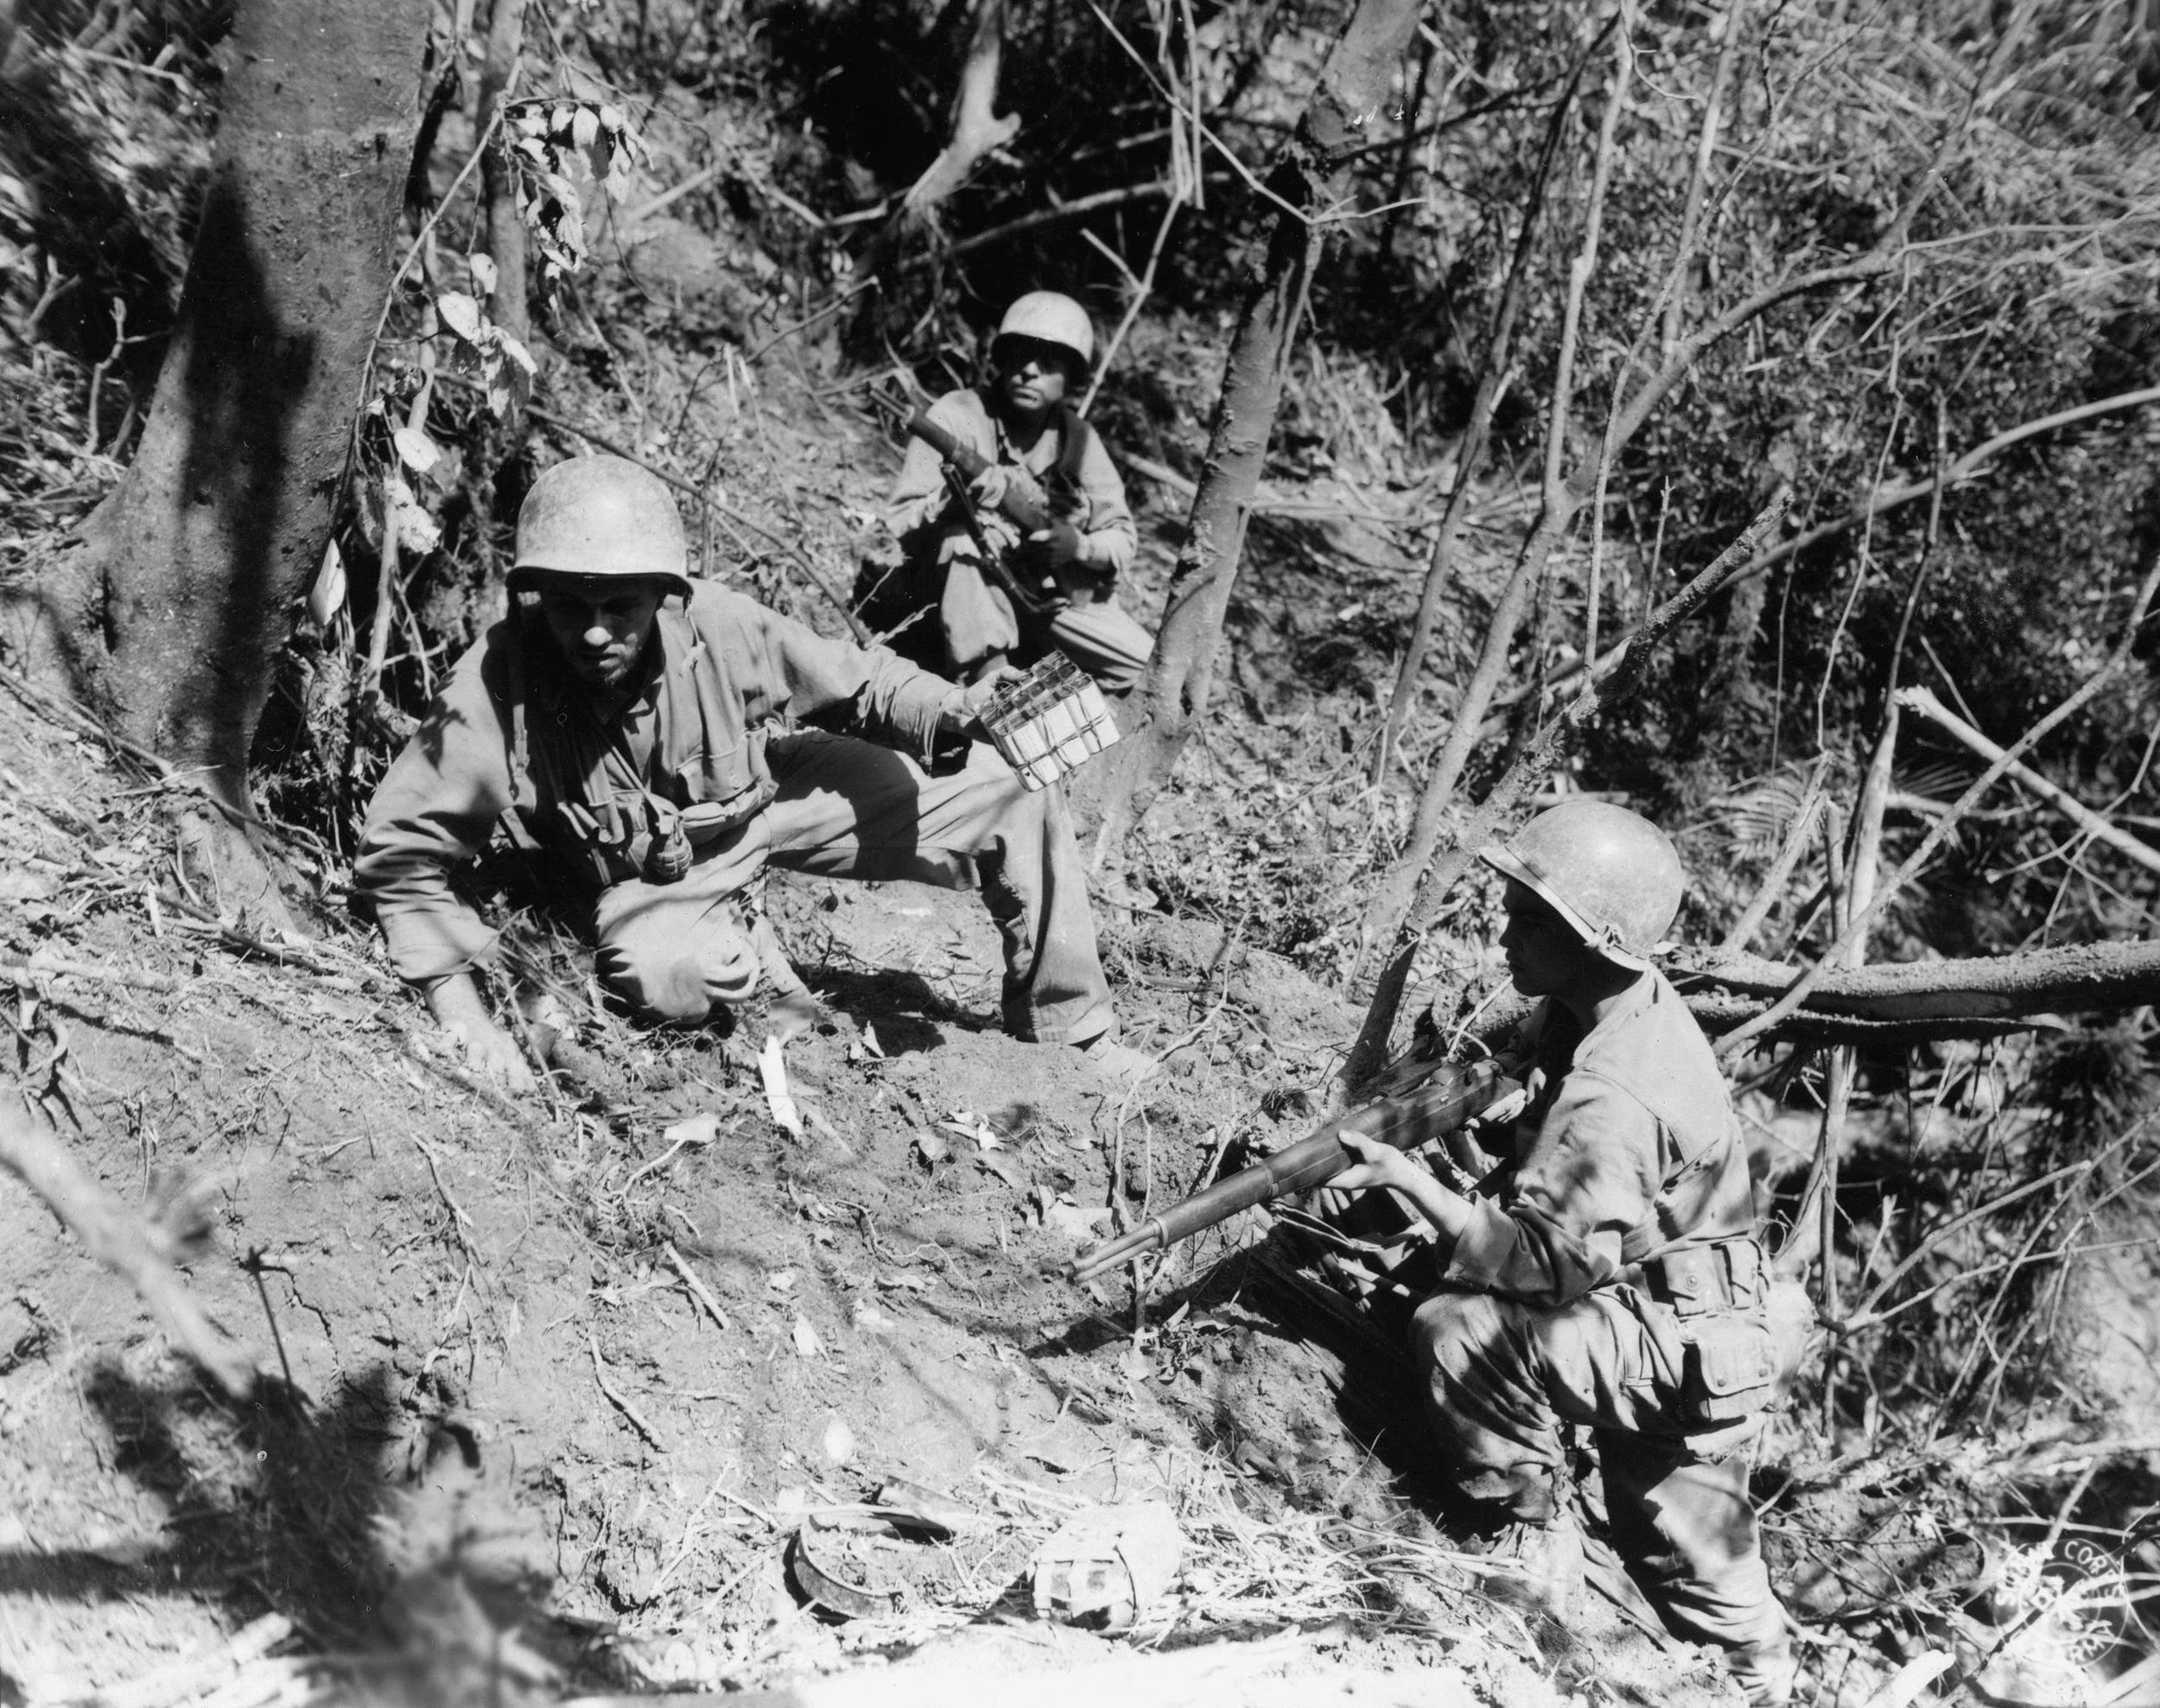 Along Luzon’s Villa Verde Trail, soldiers of the 38th Infantry Division seal the entrance to a Japanese-held cave with high explosives. The inhabitants were trapped inside and suffocated.